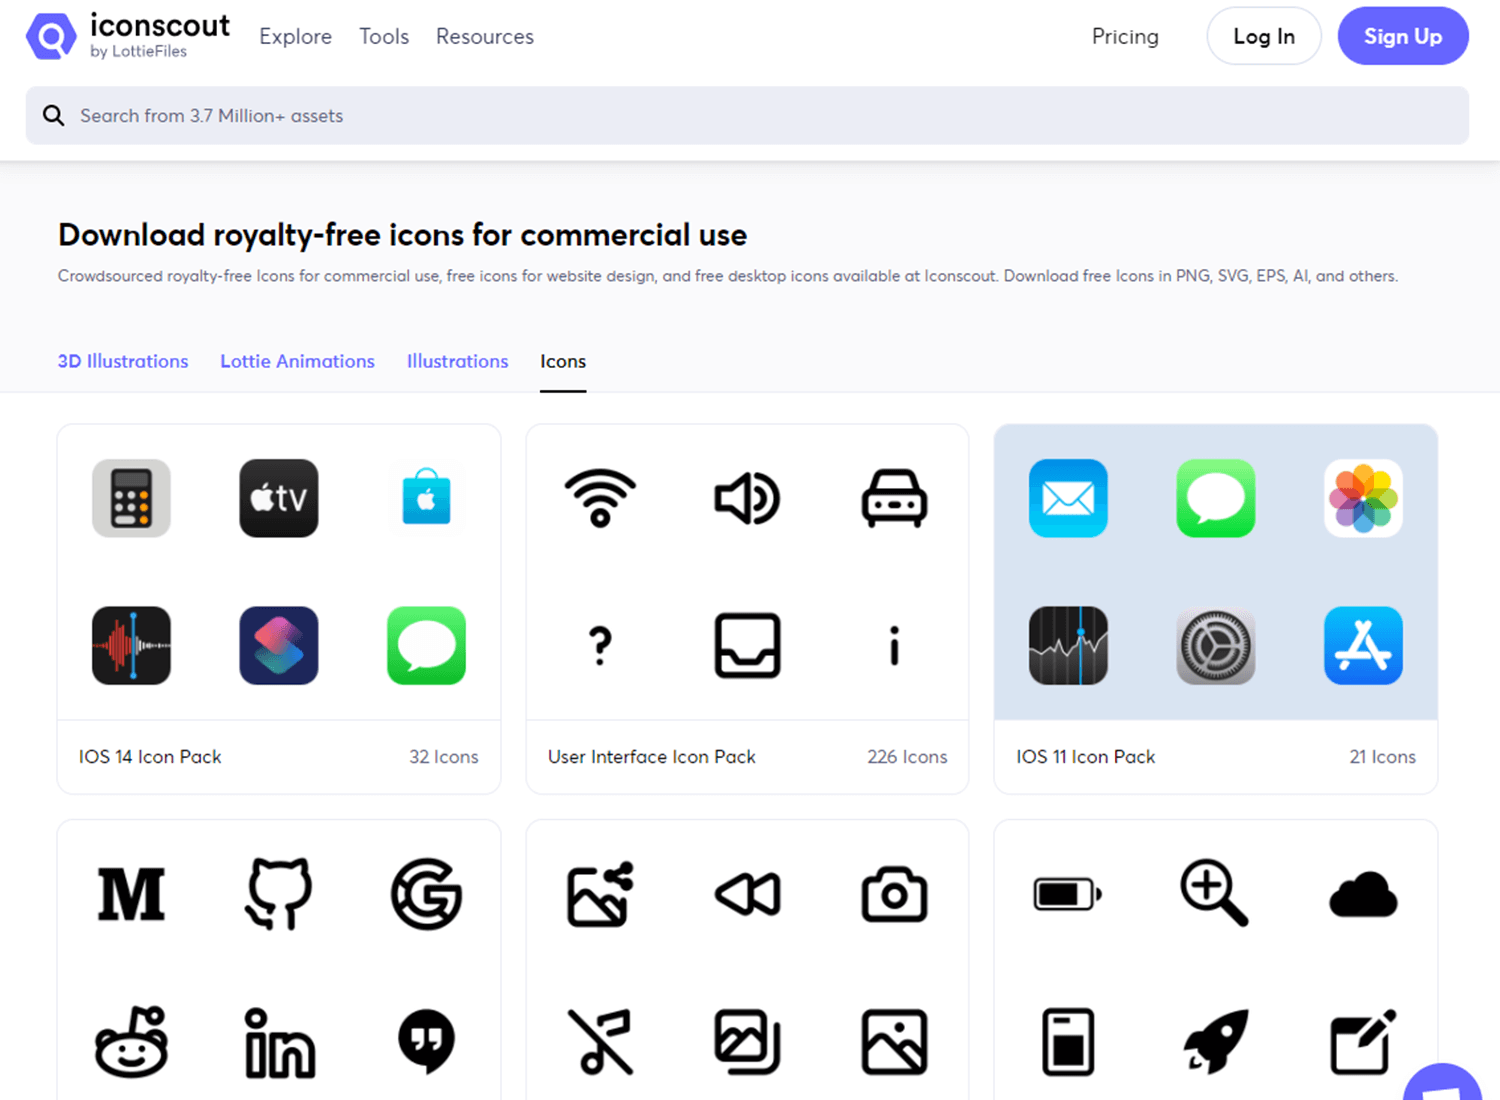 iconscout as website for free icons